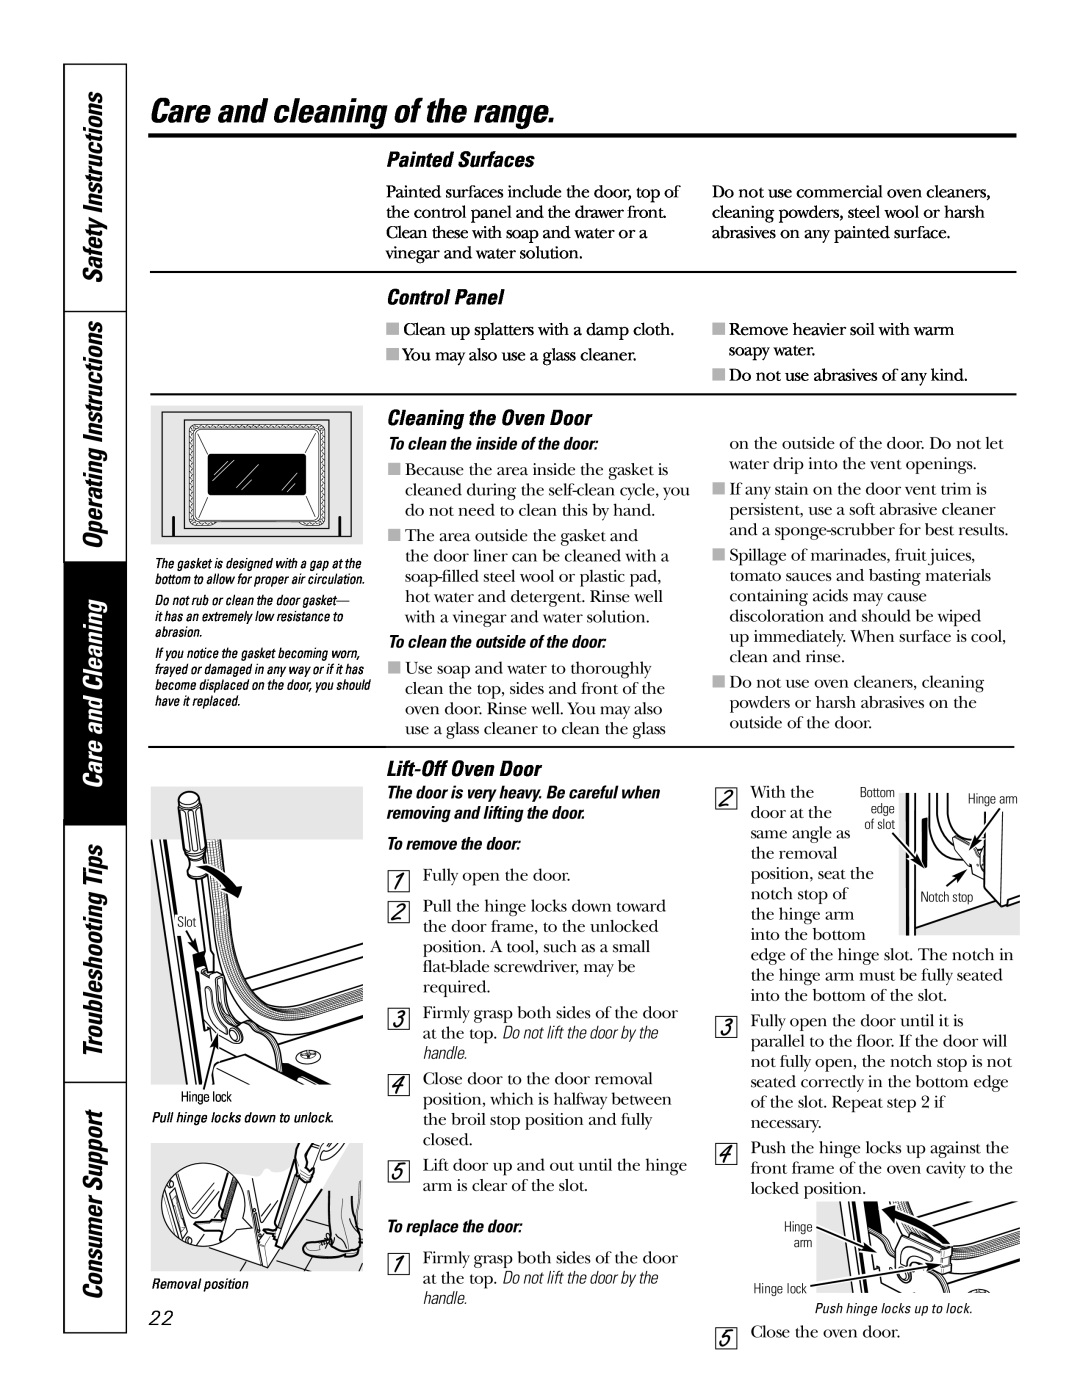 GE JSP47 Instructions Safety Instructions, and Cleaning Operating, Consumer Support Troubleshooting Tips Care, handle 